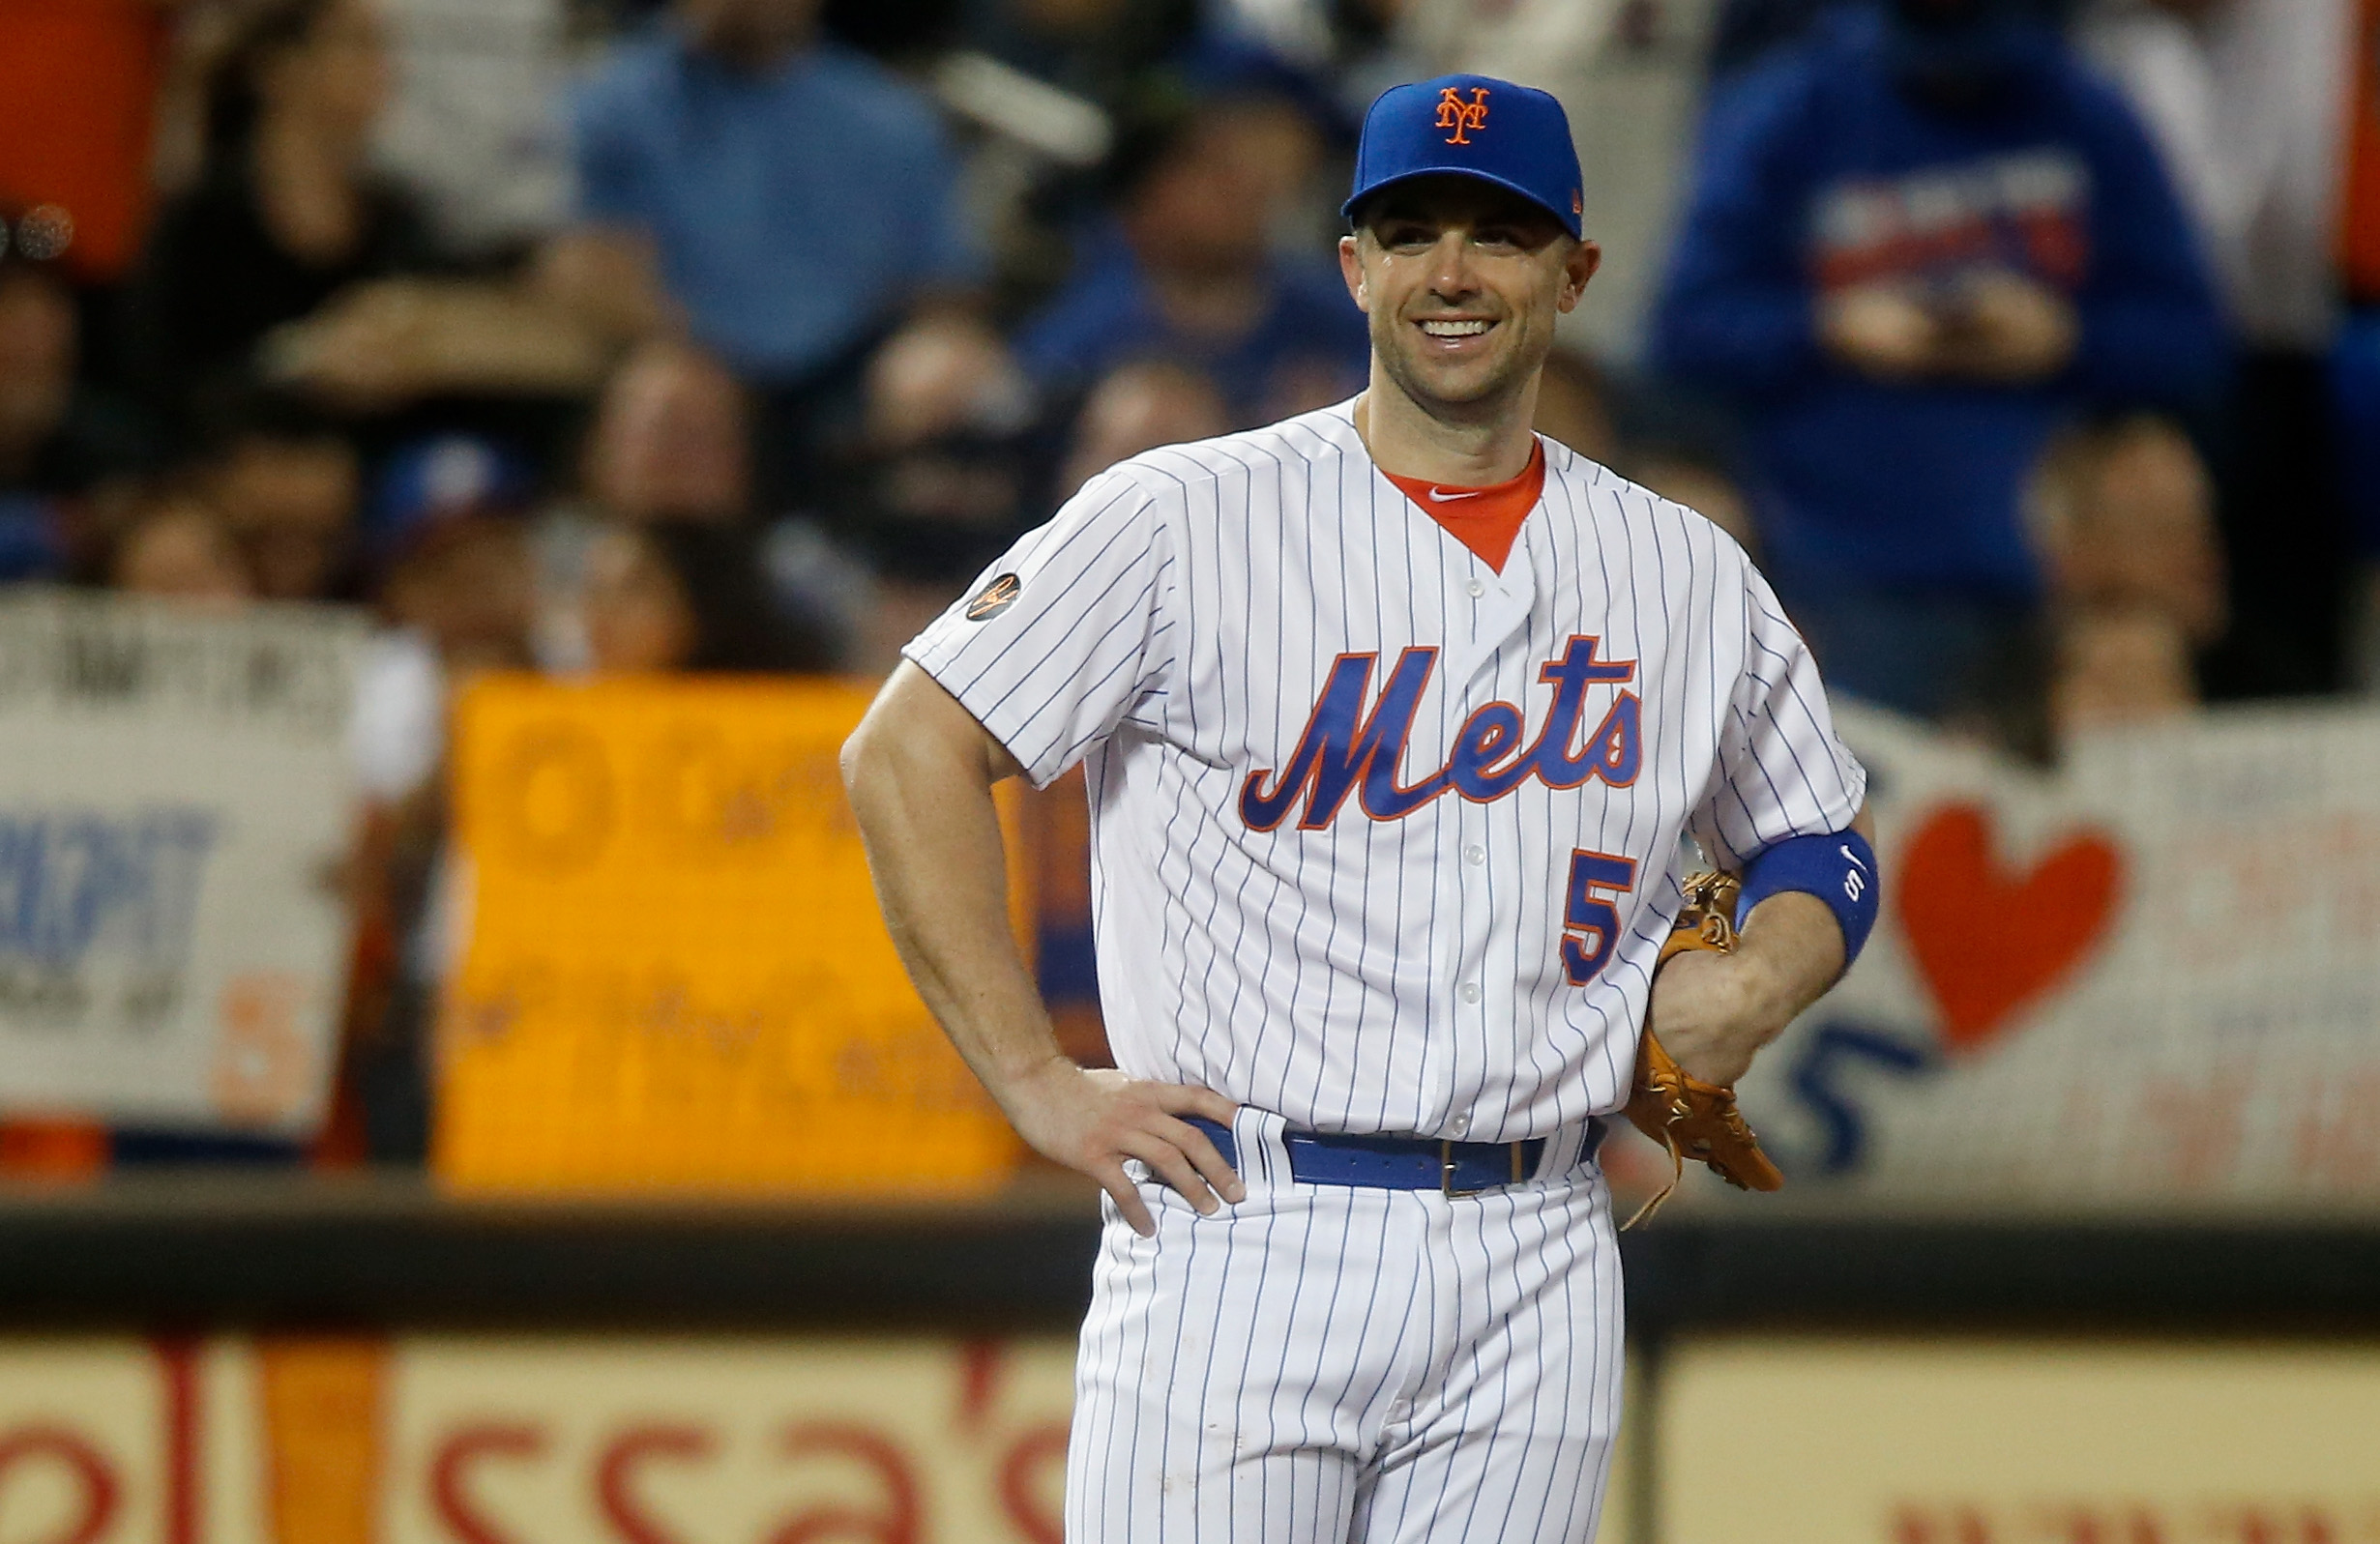 David Wright signs 7-year extension with Mets - SB Nation New York